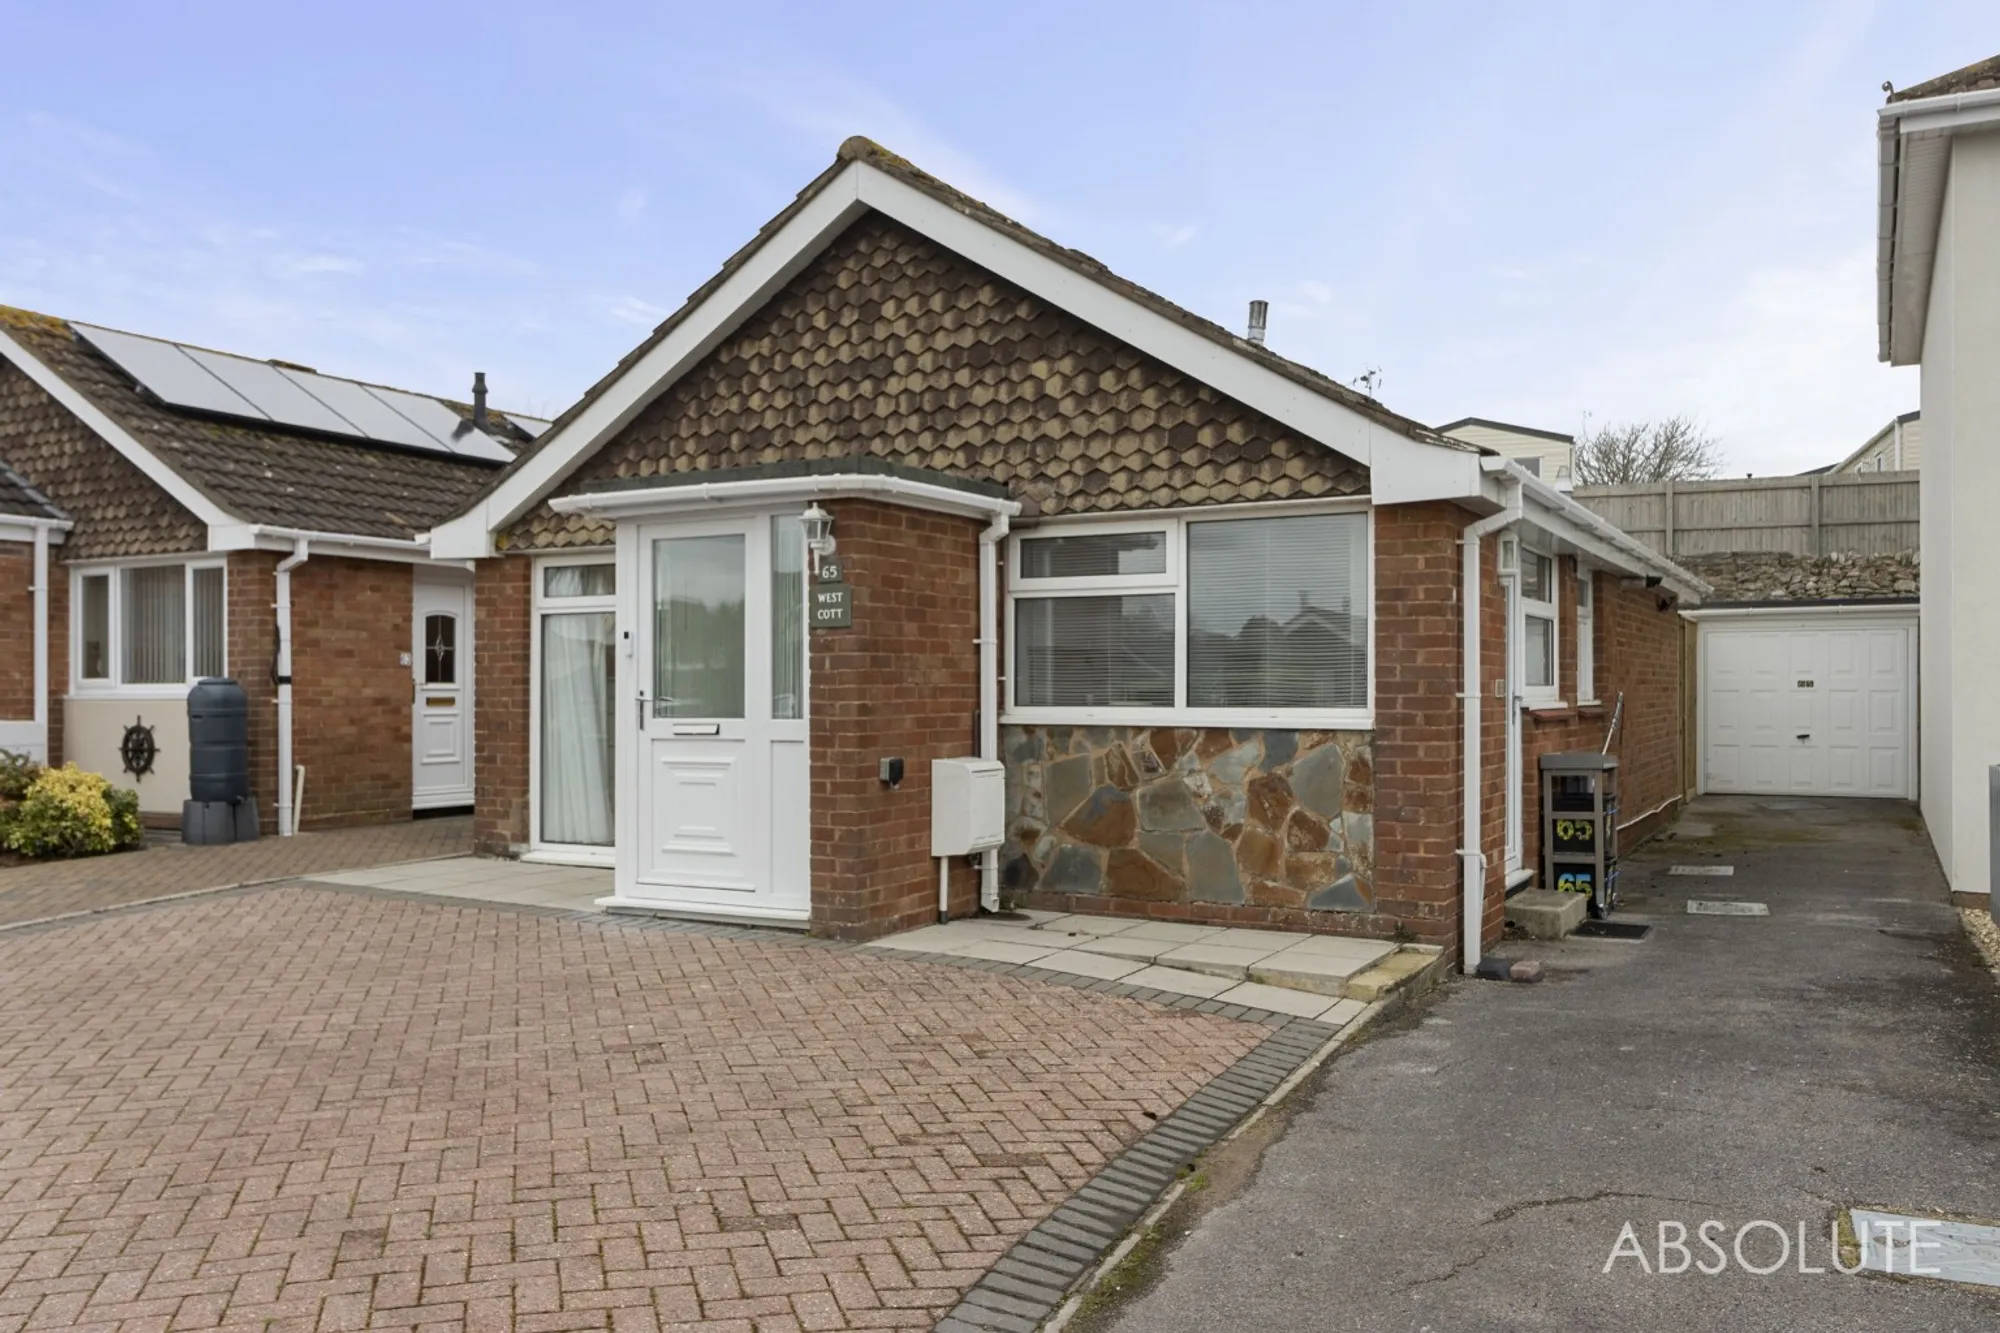 2 bed bungalow for sale 0